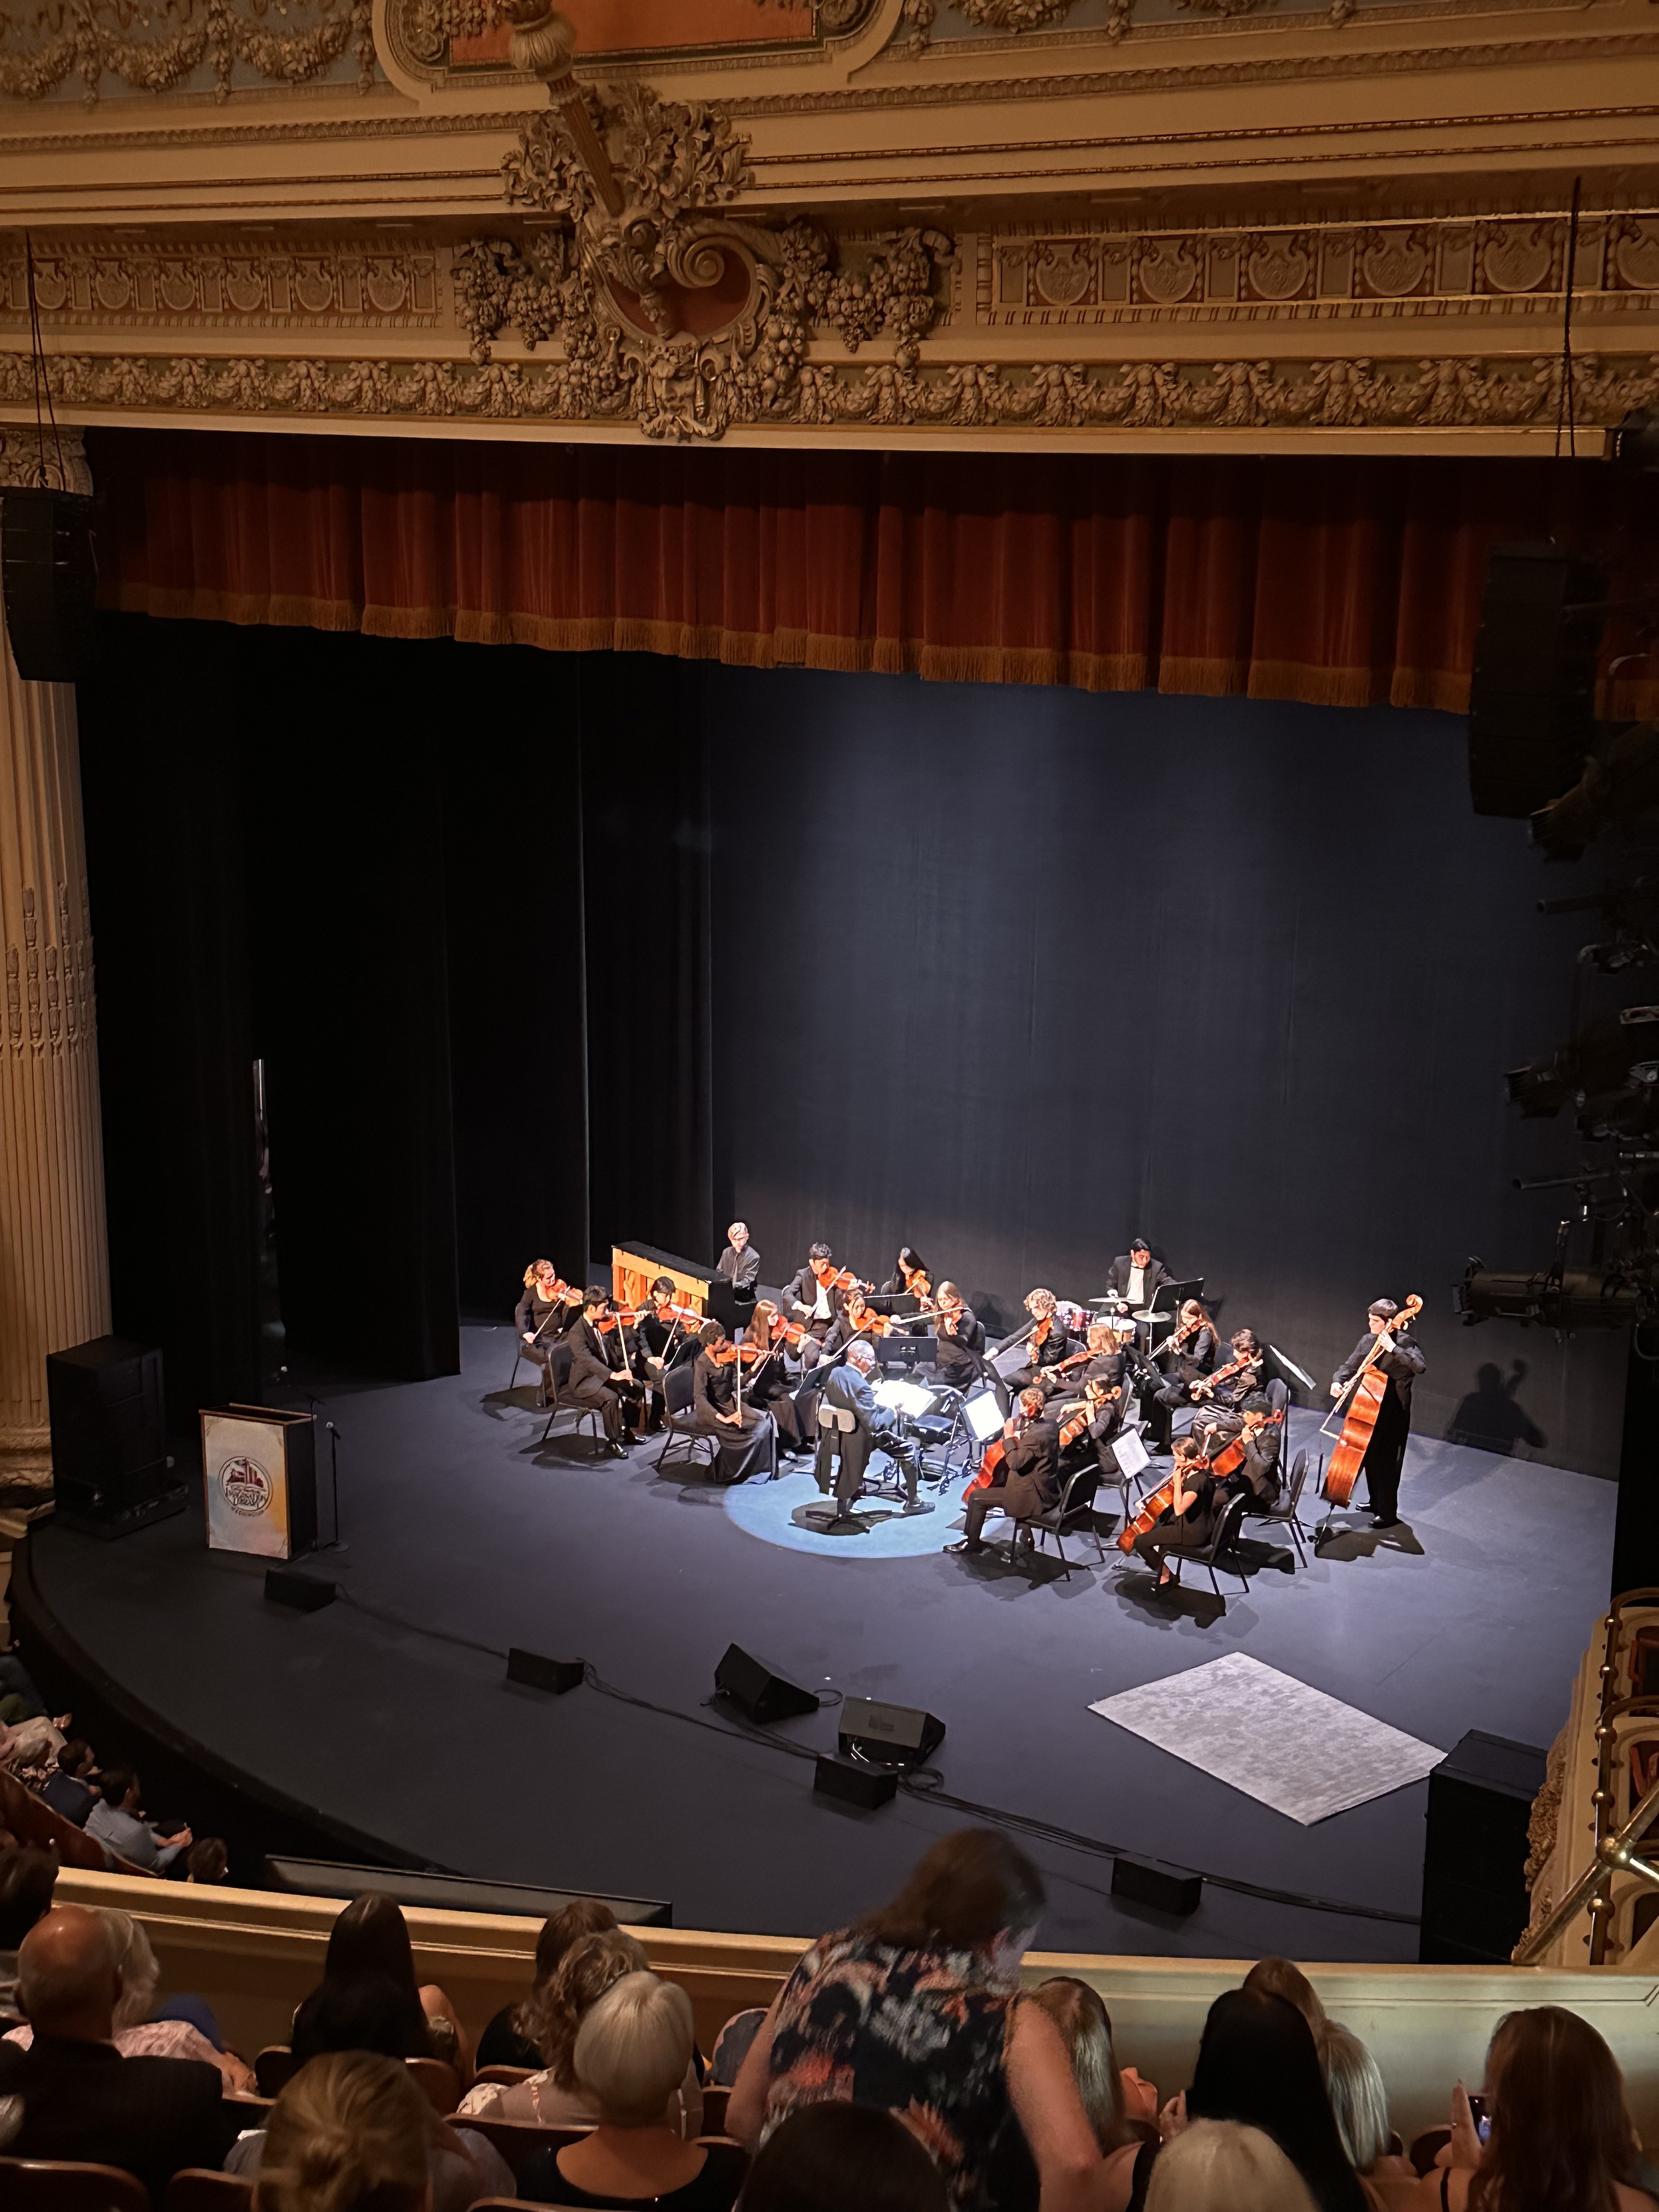 The Tacoma Youth Symphony performed renditions of Dolly Parton's songs, "I Will Always Love You" and "9 to 5." // CREDIT: Lauren Gallup, NWPB